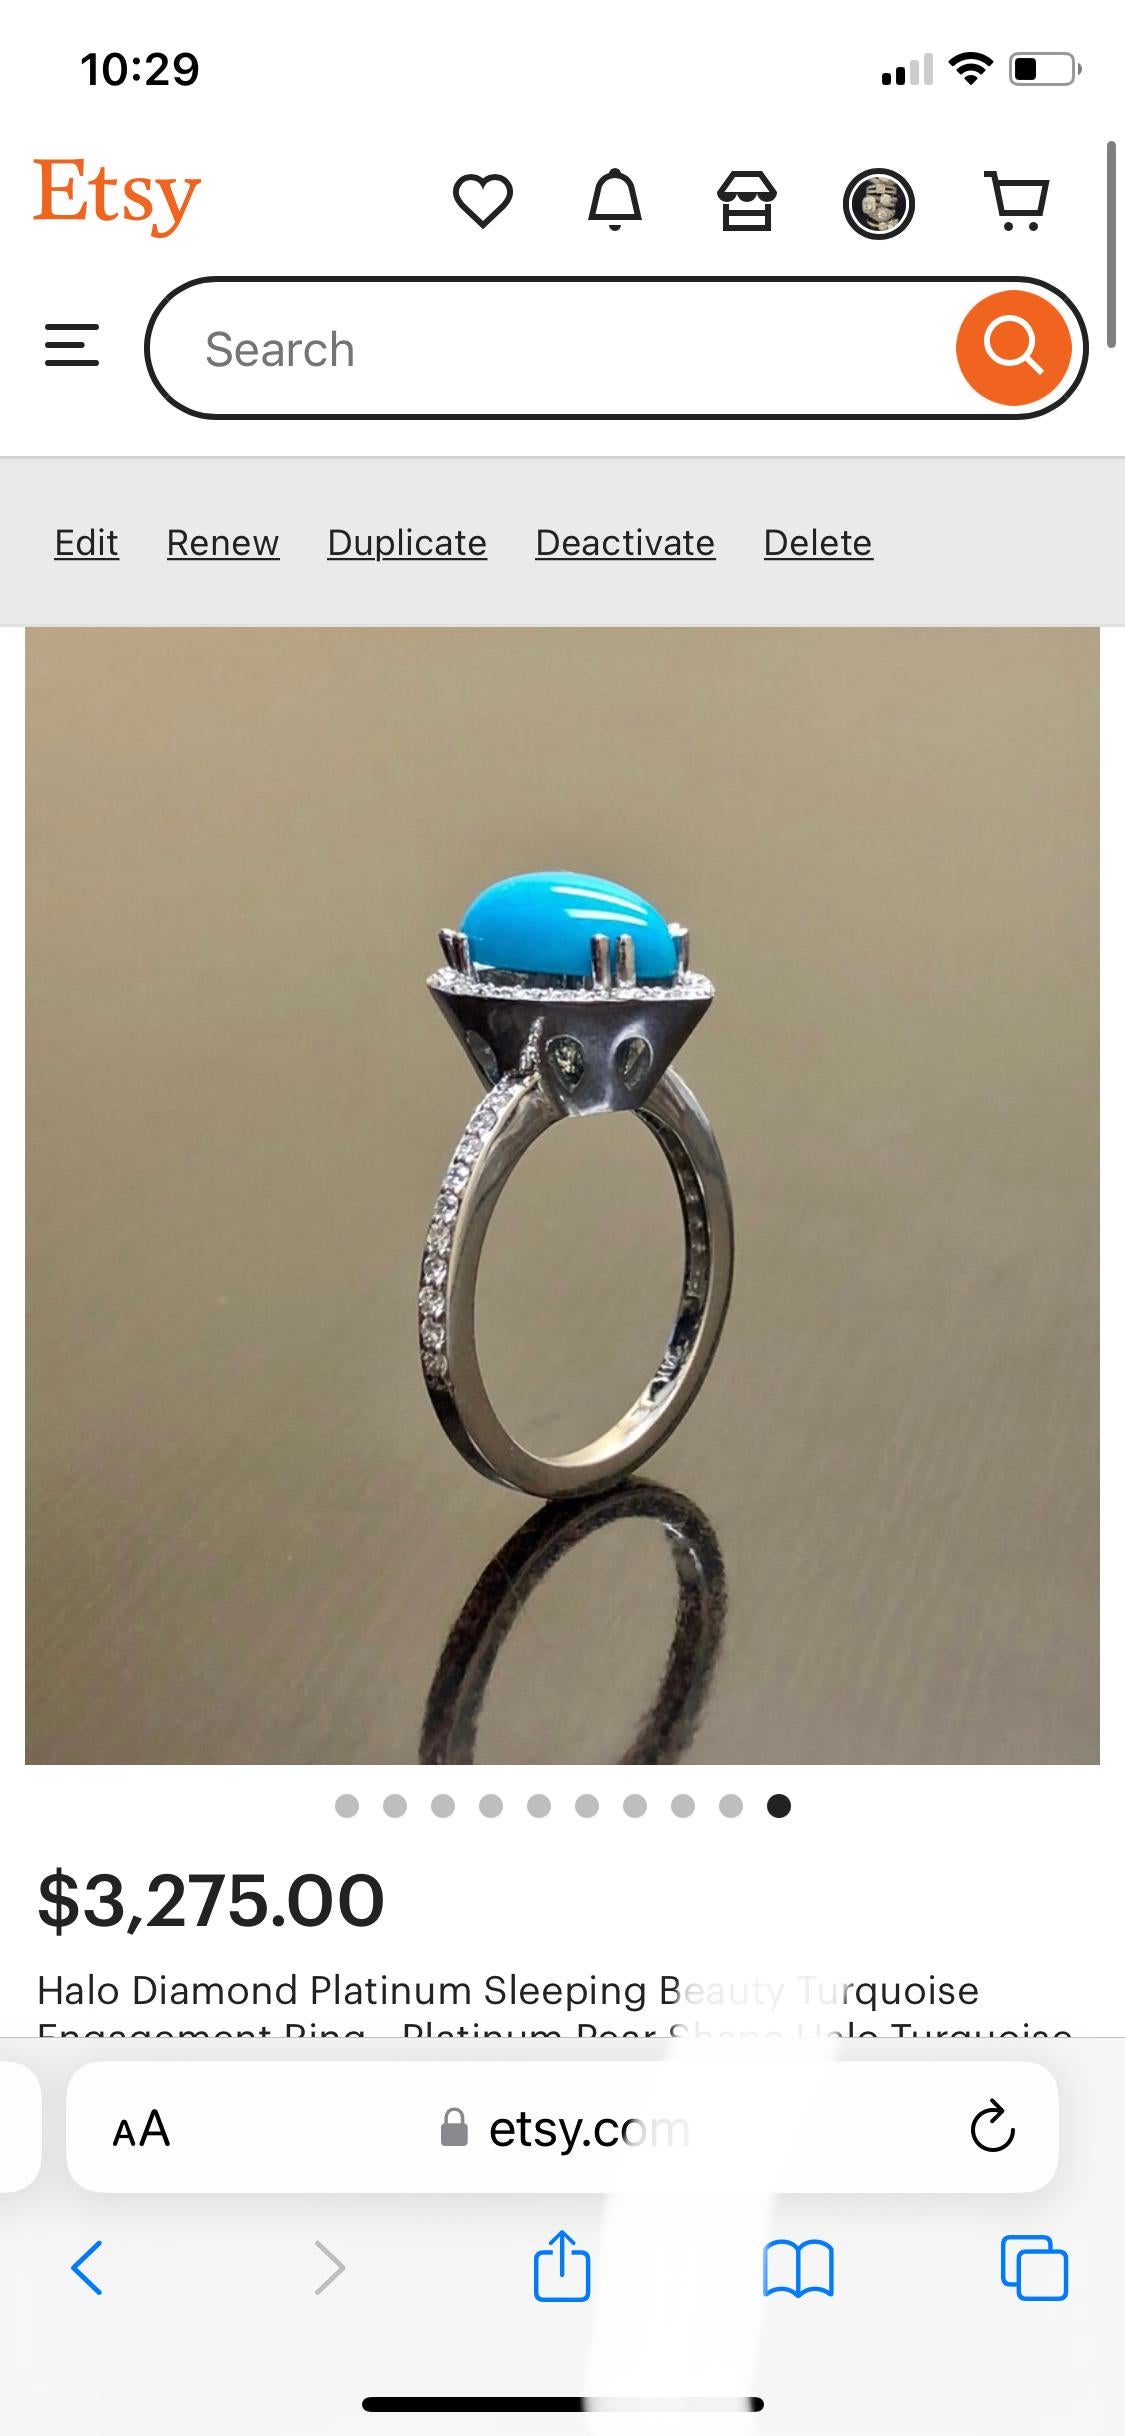 DeKara Designs Collection

Our latest design! An elegant Tiffany Blue Colored Pear Shaped Cabochon Natural Turquoise surrounded by beautiful diamonds in a halo setting.

Metal- 90% Platinum, 10% Iridium.

Stones- Sleeping Beauty Blue Pear Shape